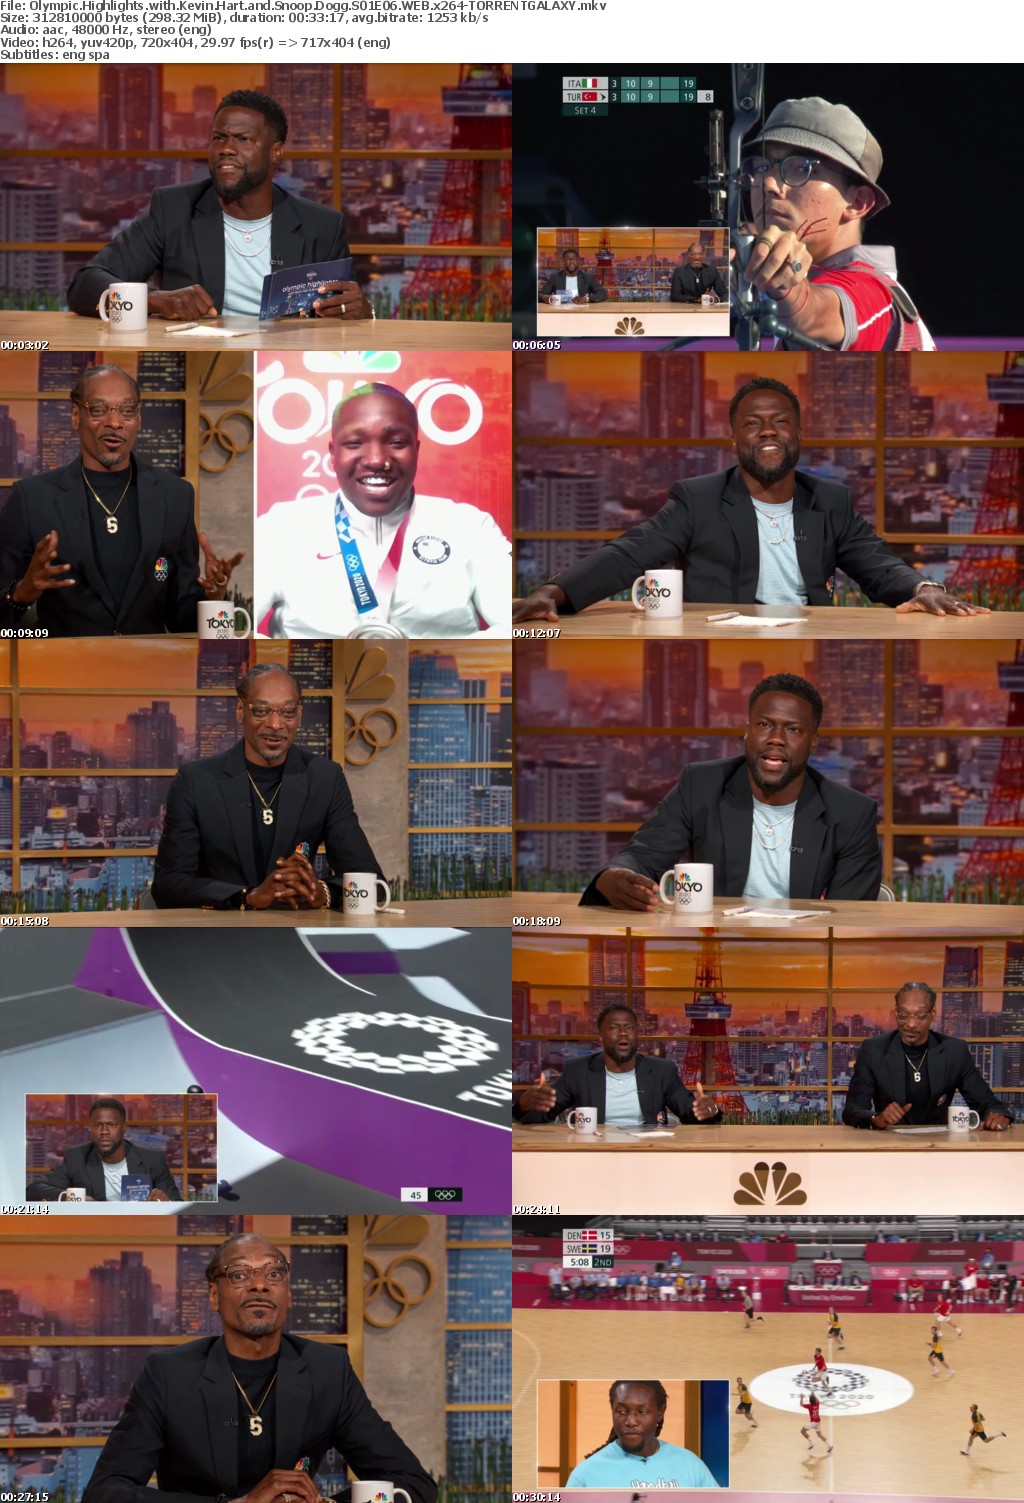 Olympic Highlights with Kevin Hart and Snoop Dogg S01E06 WEB x264-GALAXY